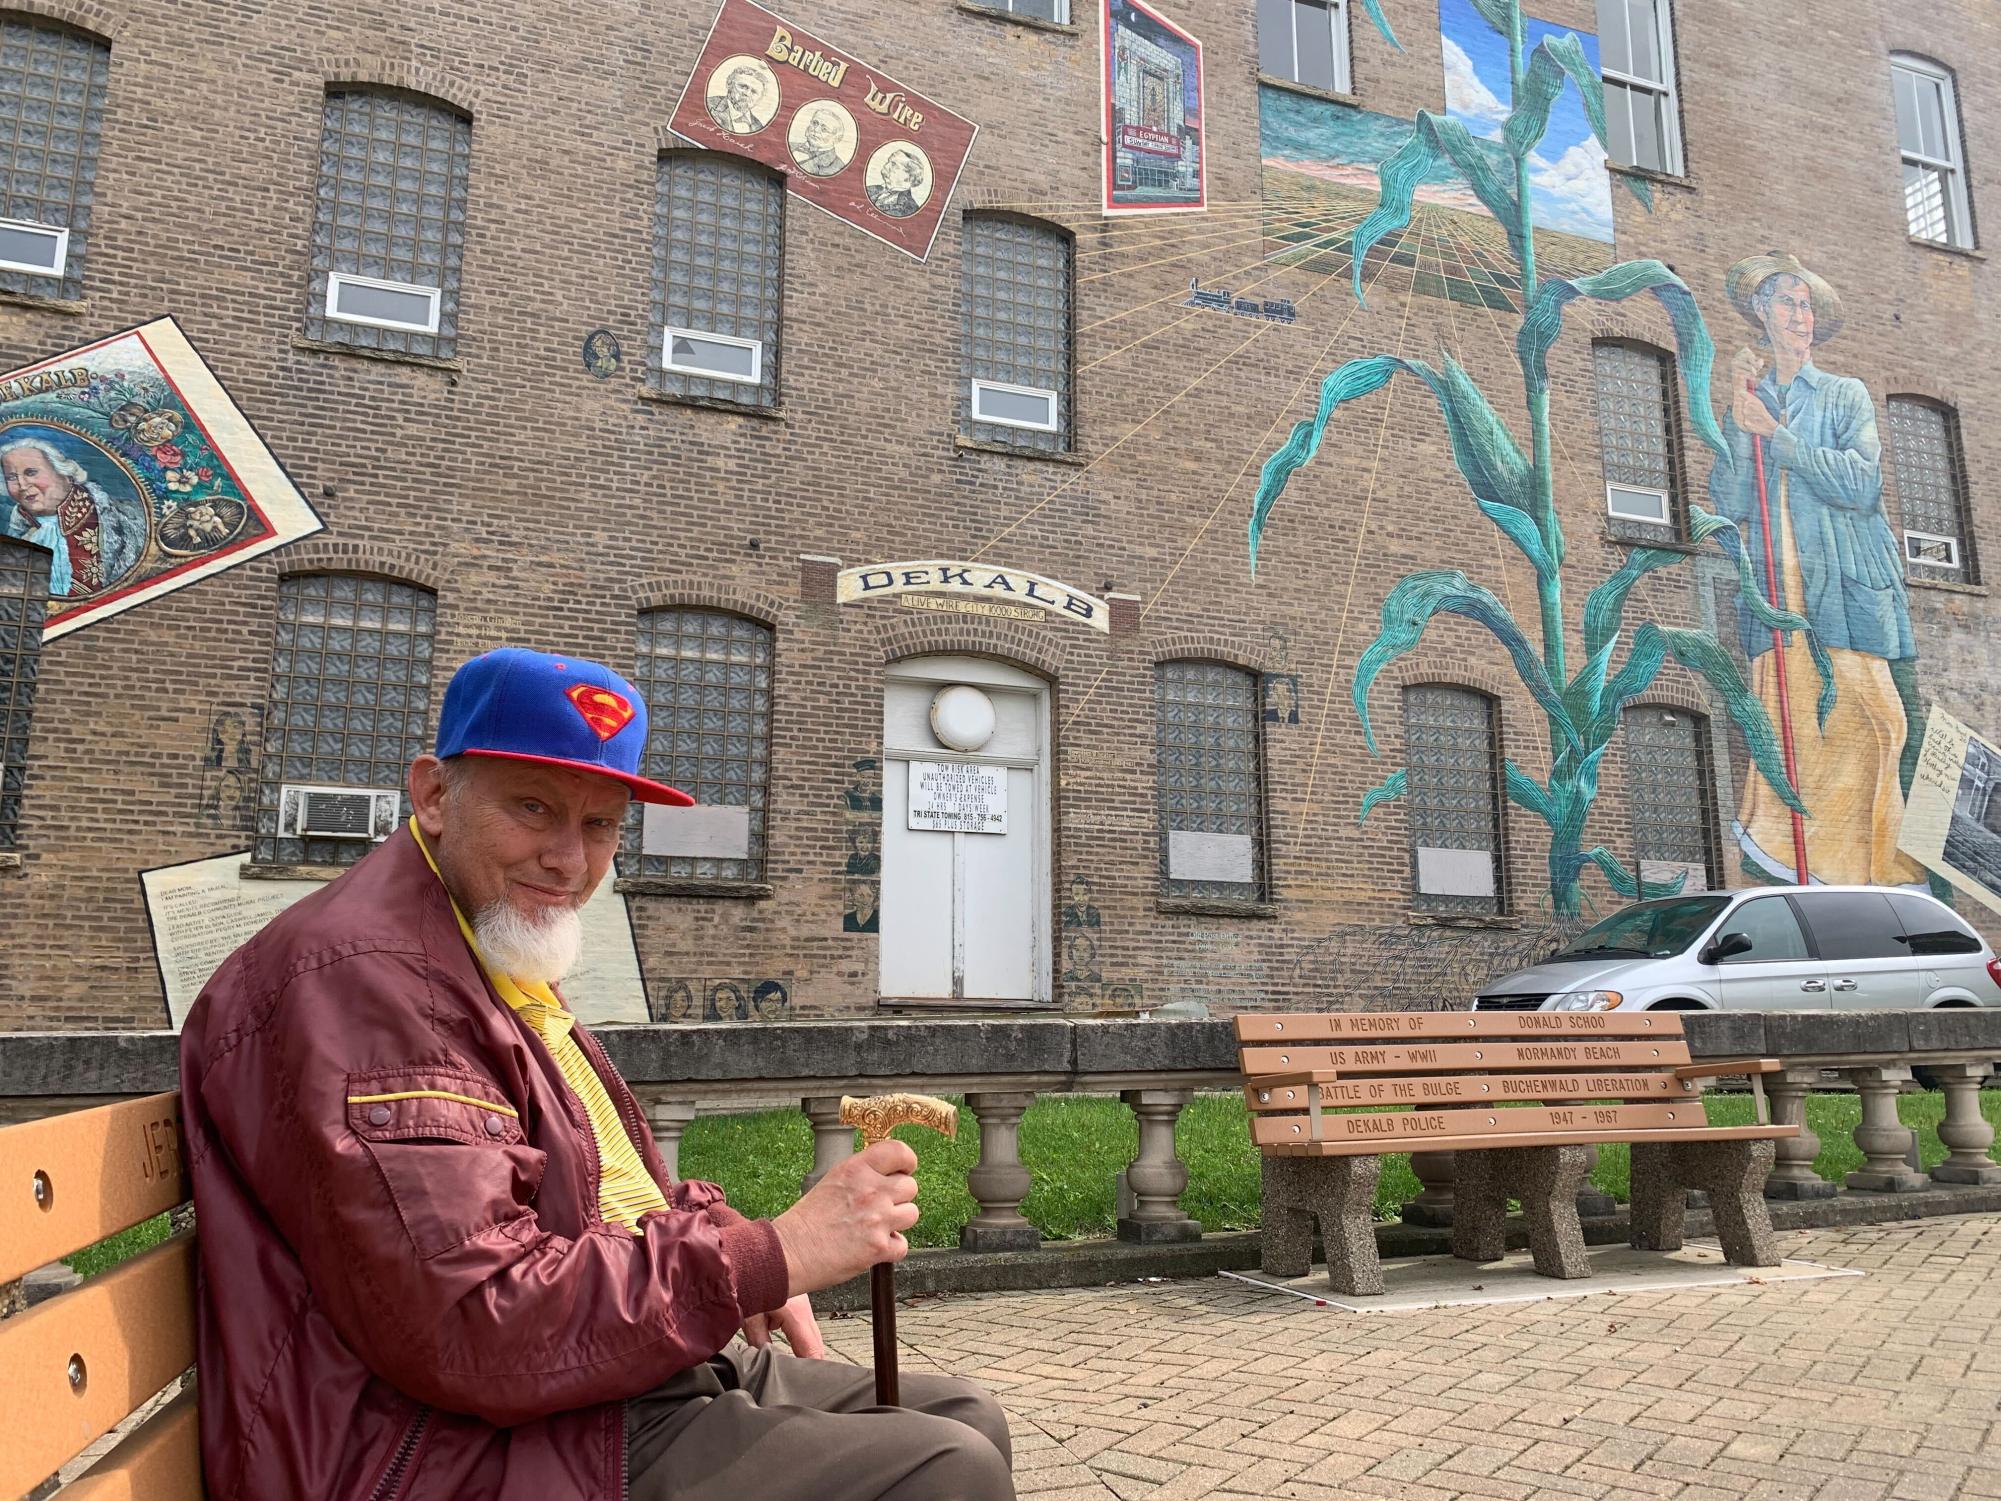 Stephen J. Bigolin sits on a park bench on Sept. 20 at Memorial Park in front of the mural facing Lincoln Highway. Bigolin has supported and discovered DeKalb’s local history since he moved to DeKalb in 1967. (Rachel Cormier | Northern Star)